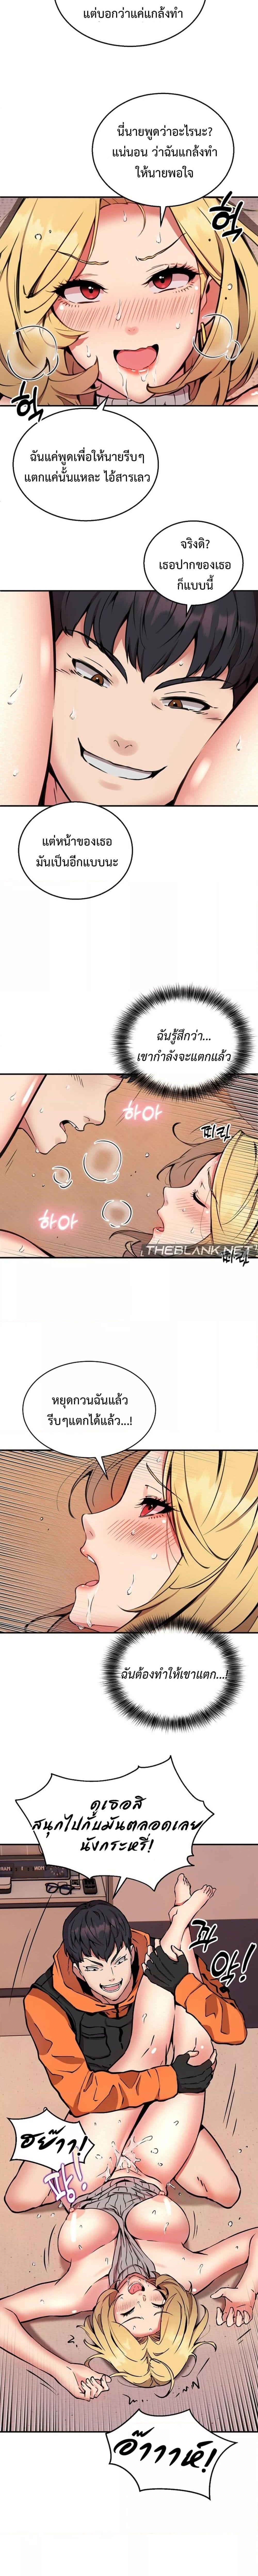 Driver in the New City ตอนที่ 10 ภาพ 8